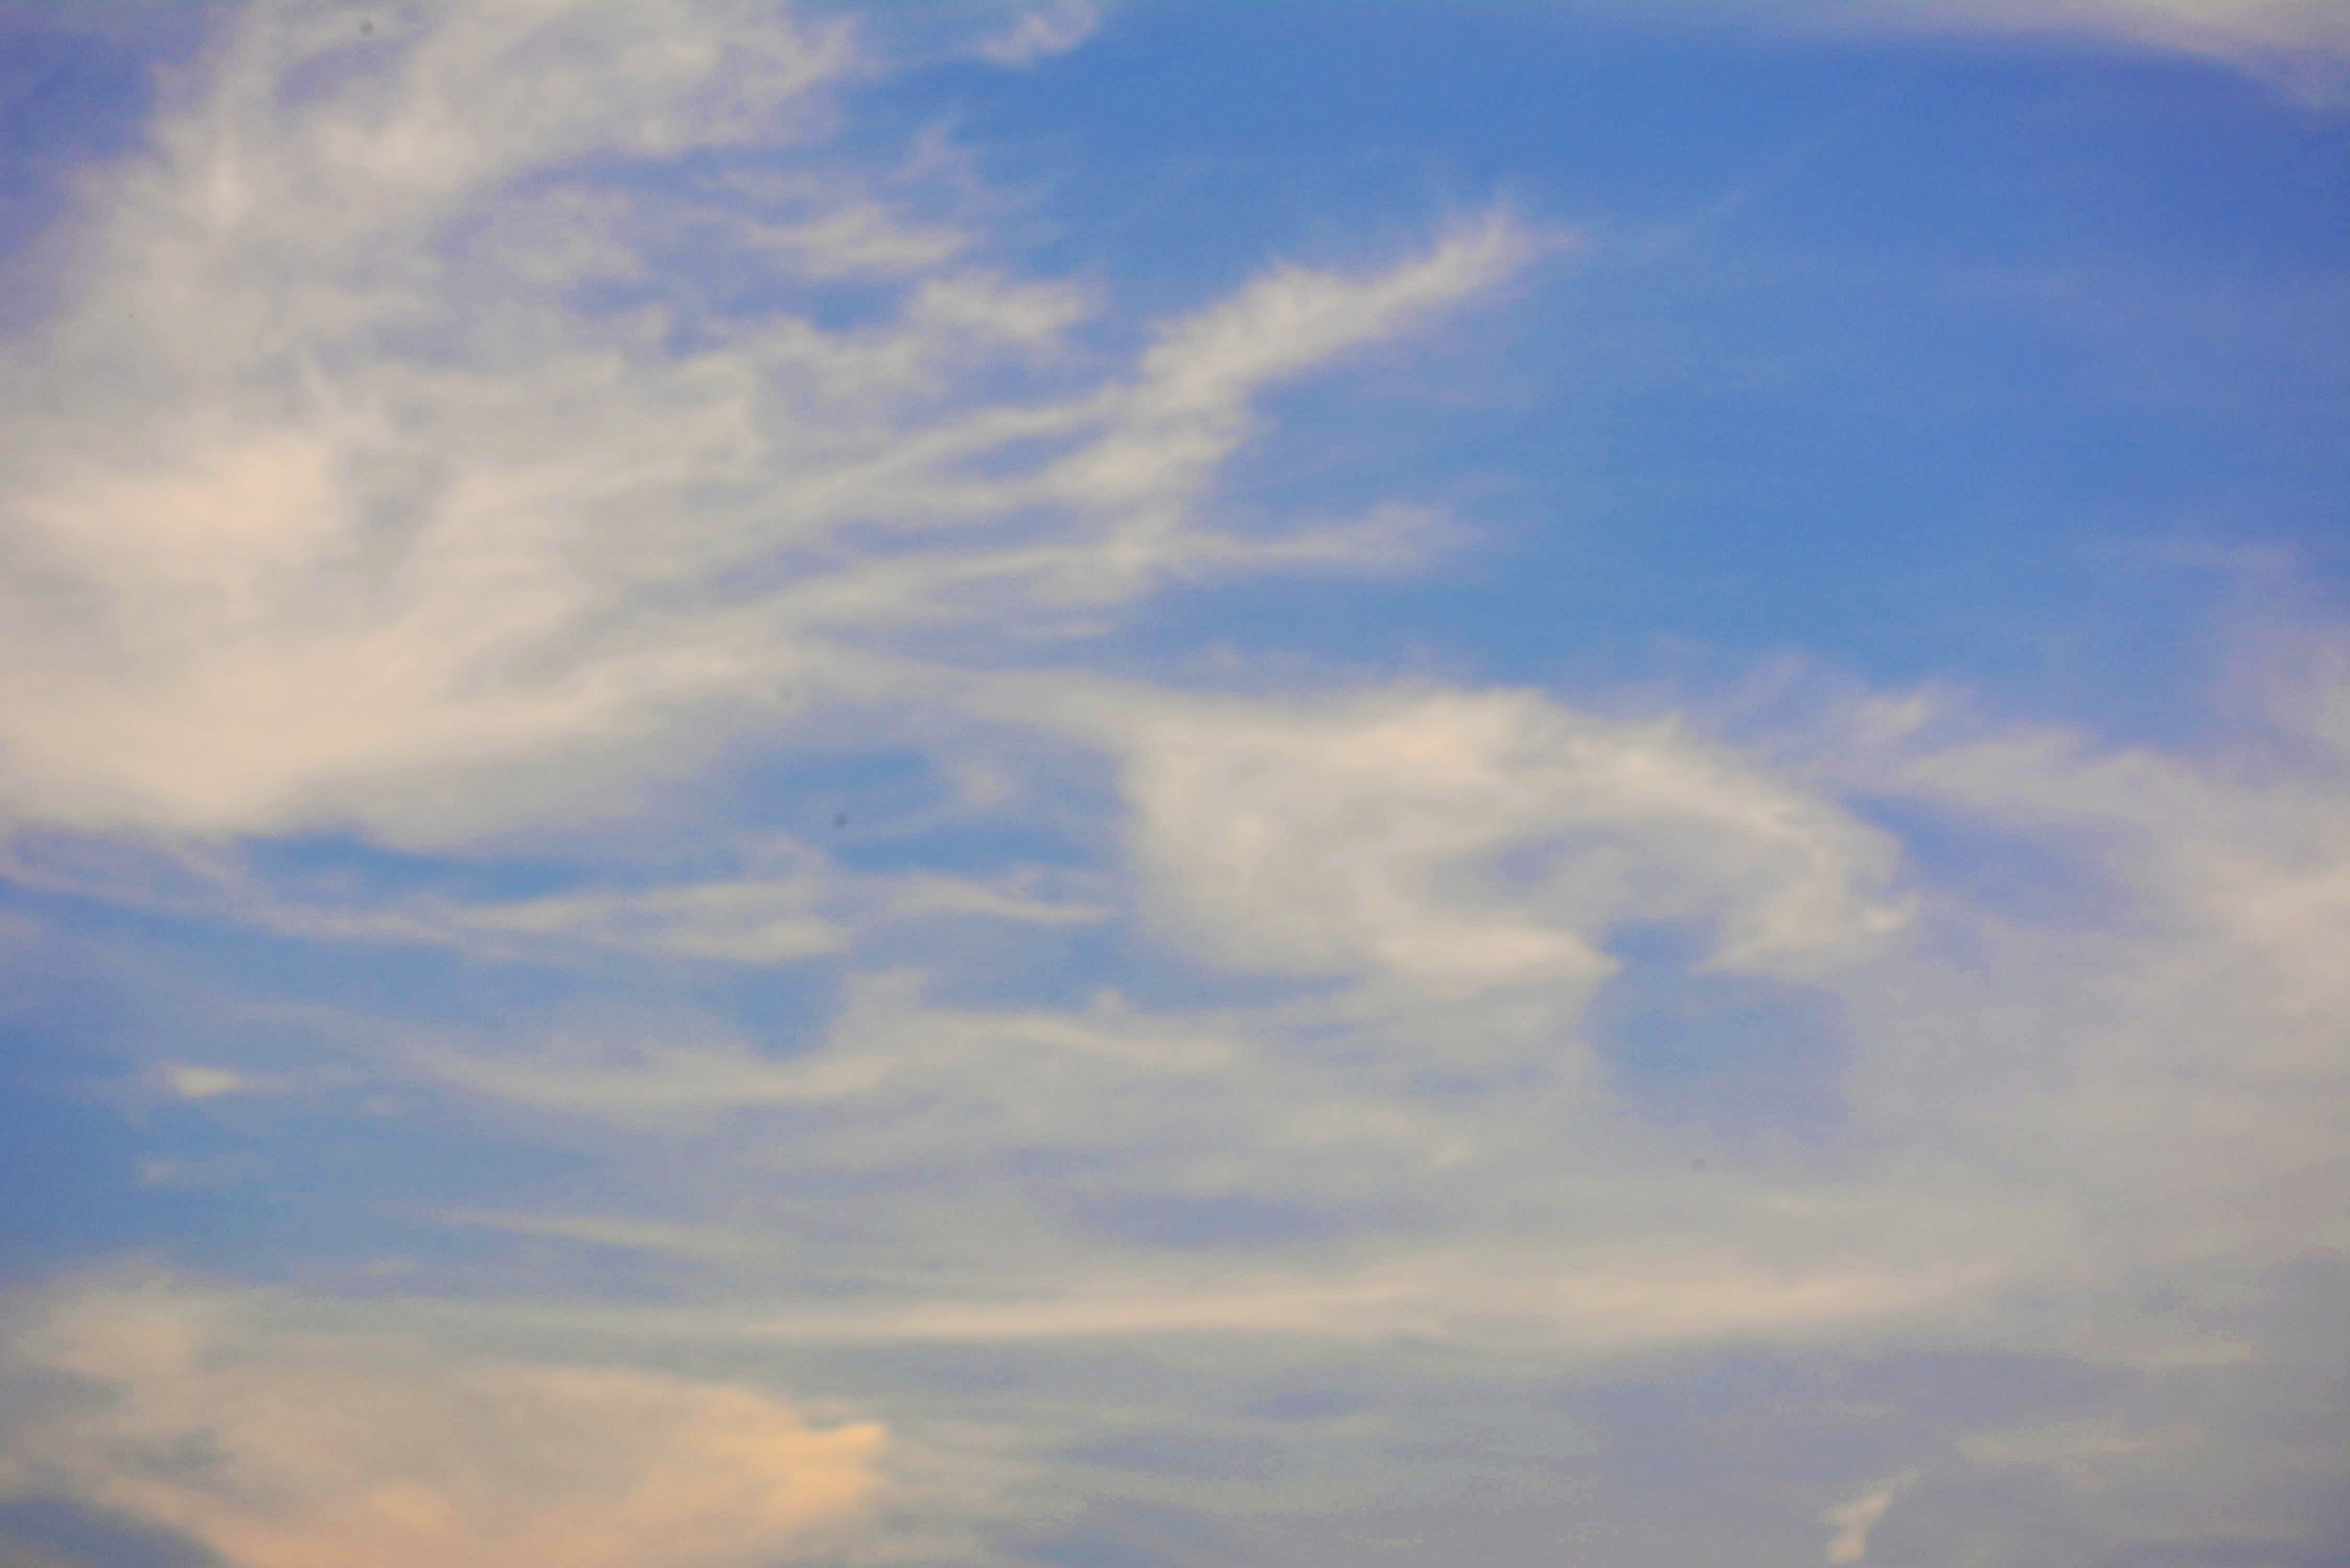 Blue Sky With Clouds, Blue, Clouds, Depressing, Sky, HQ Photo